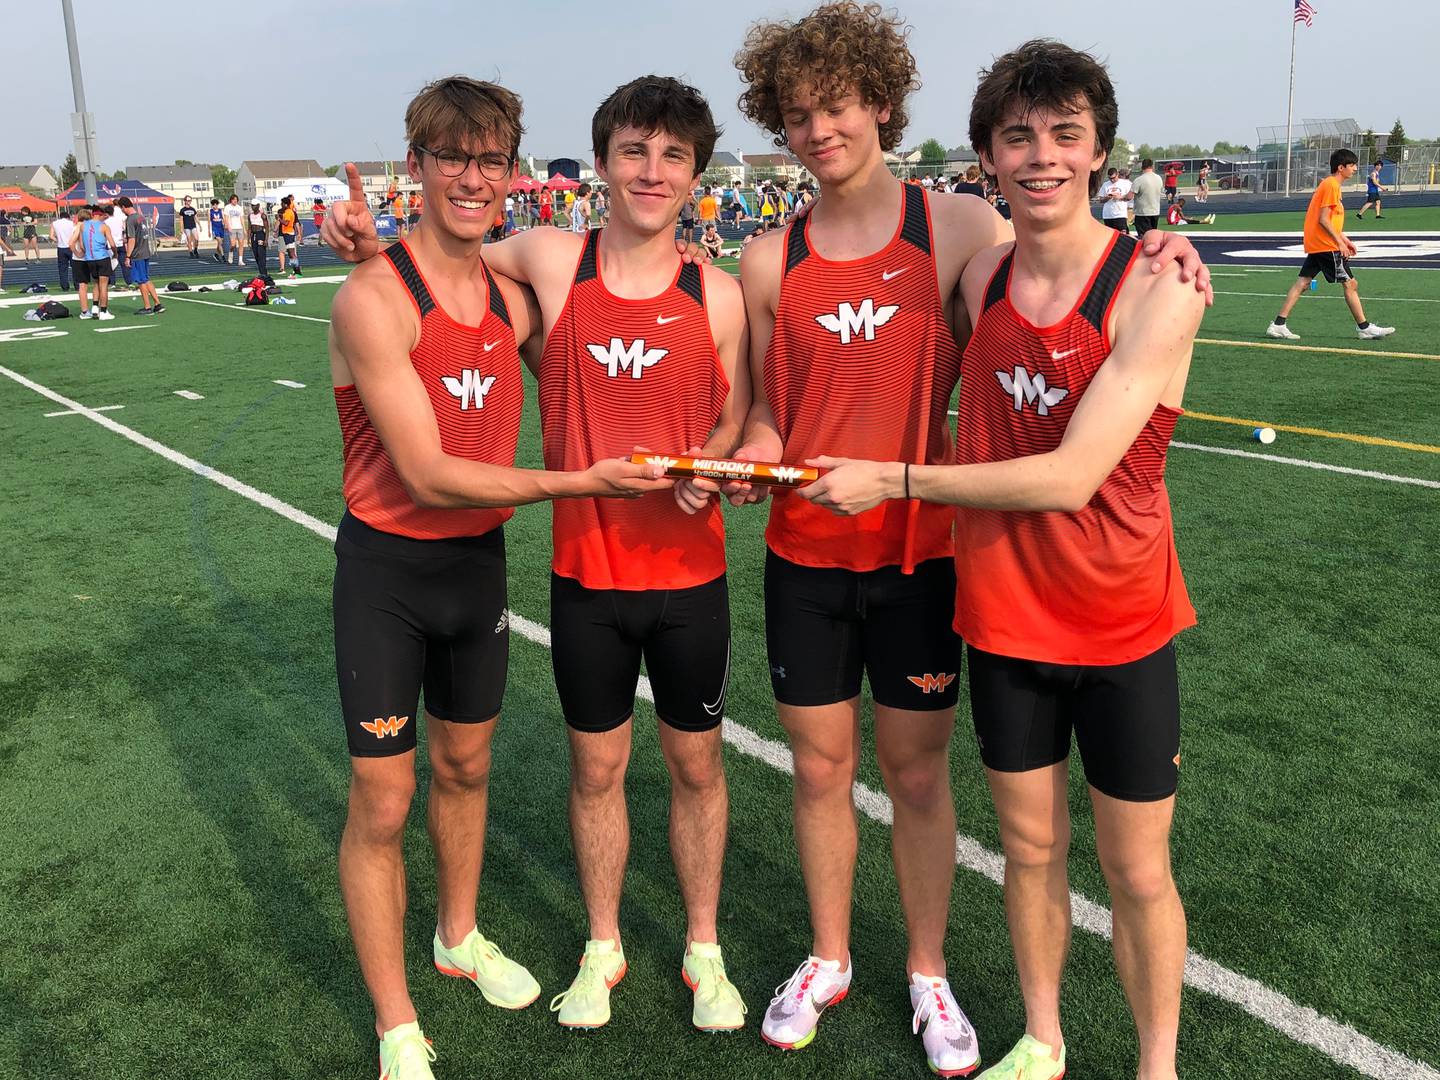 Minooka's Cole Kics, Alex Forster, Emerson Fayman and Zach Balzer set a new meet record in the 4x800-meter relay with a time of 7:48.99, also the fastest time in the state this spring.